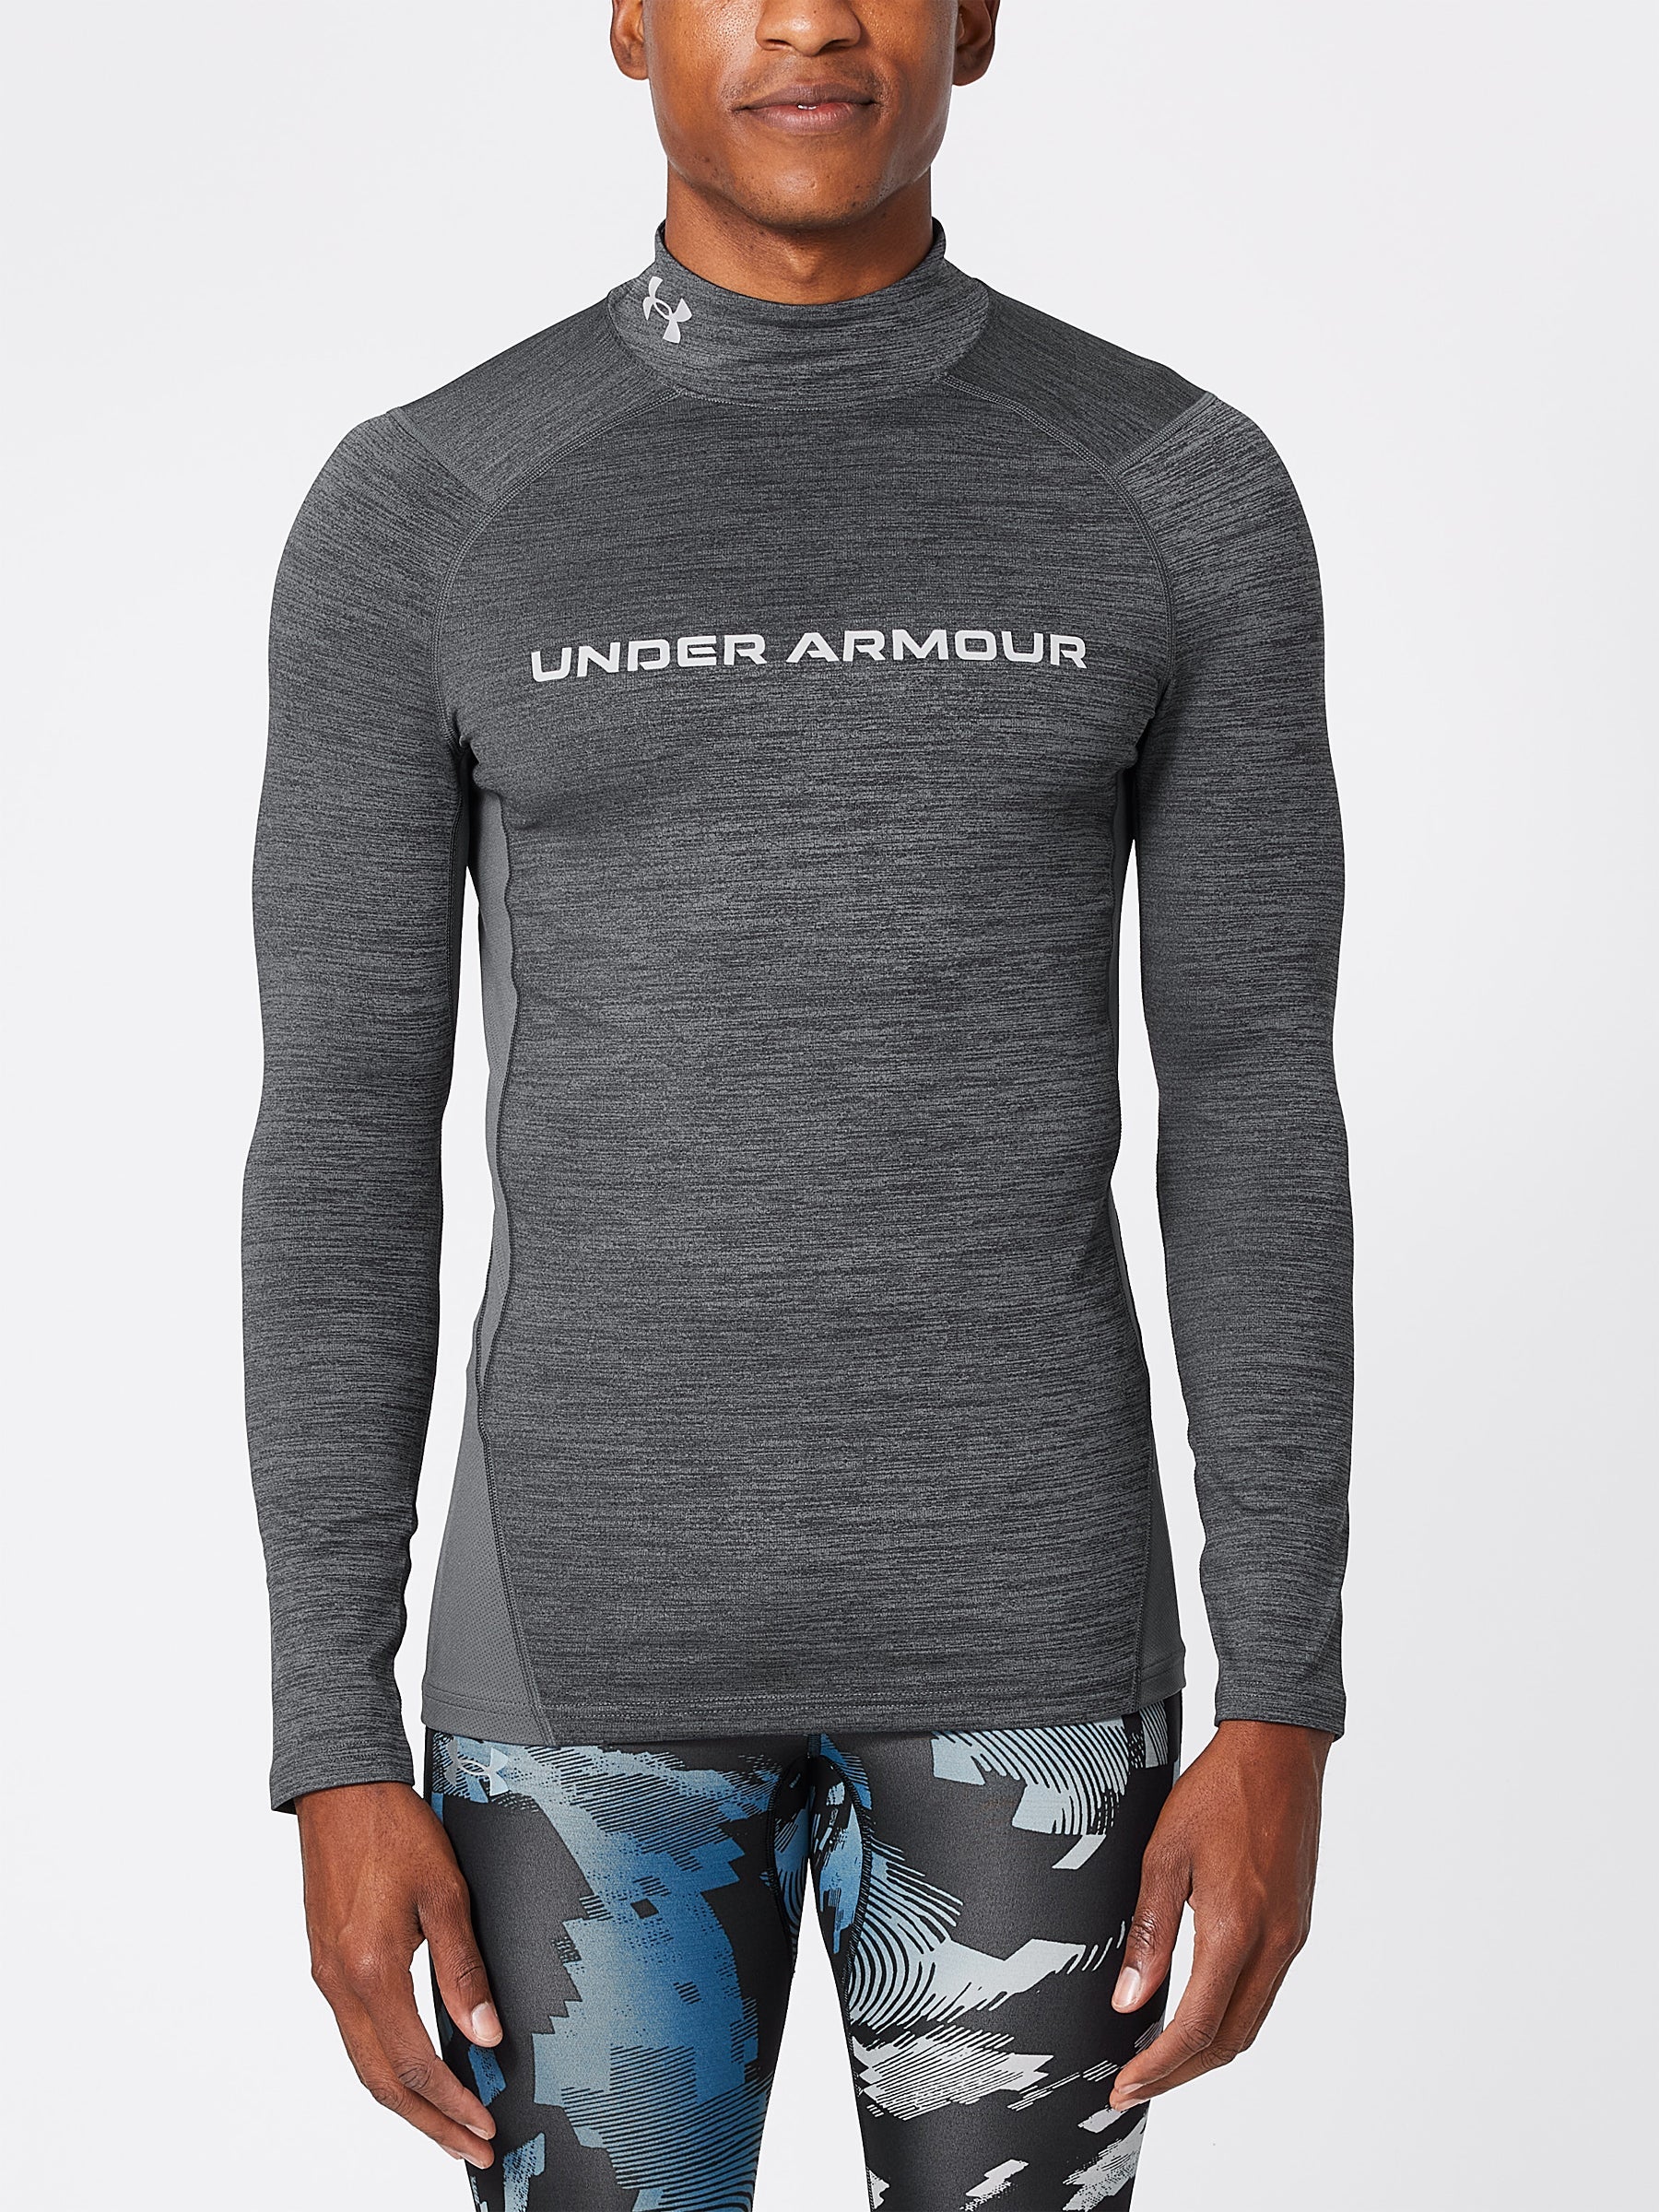 2021 Under Armour Mens ColdGear Armour Fitted Twist Mock Top Sports Baselayer 